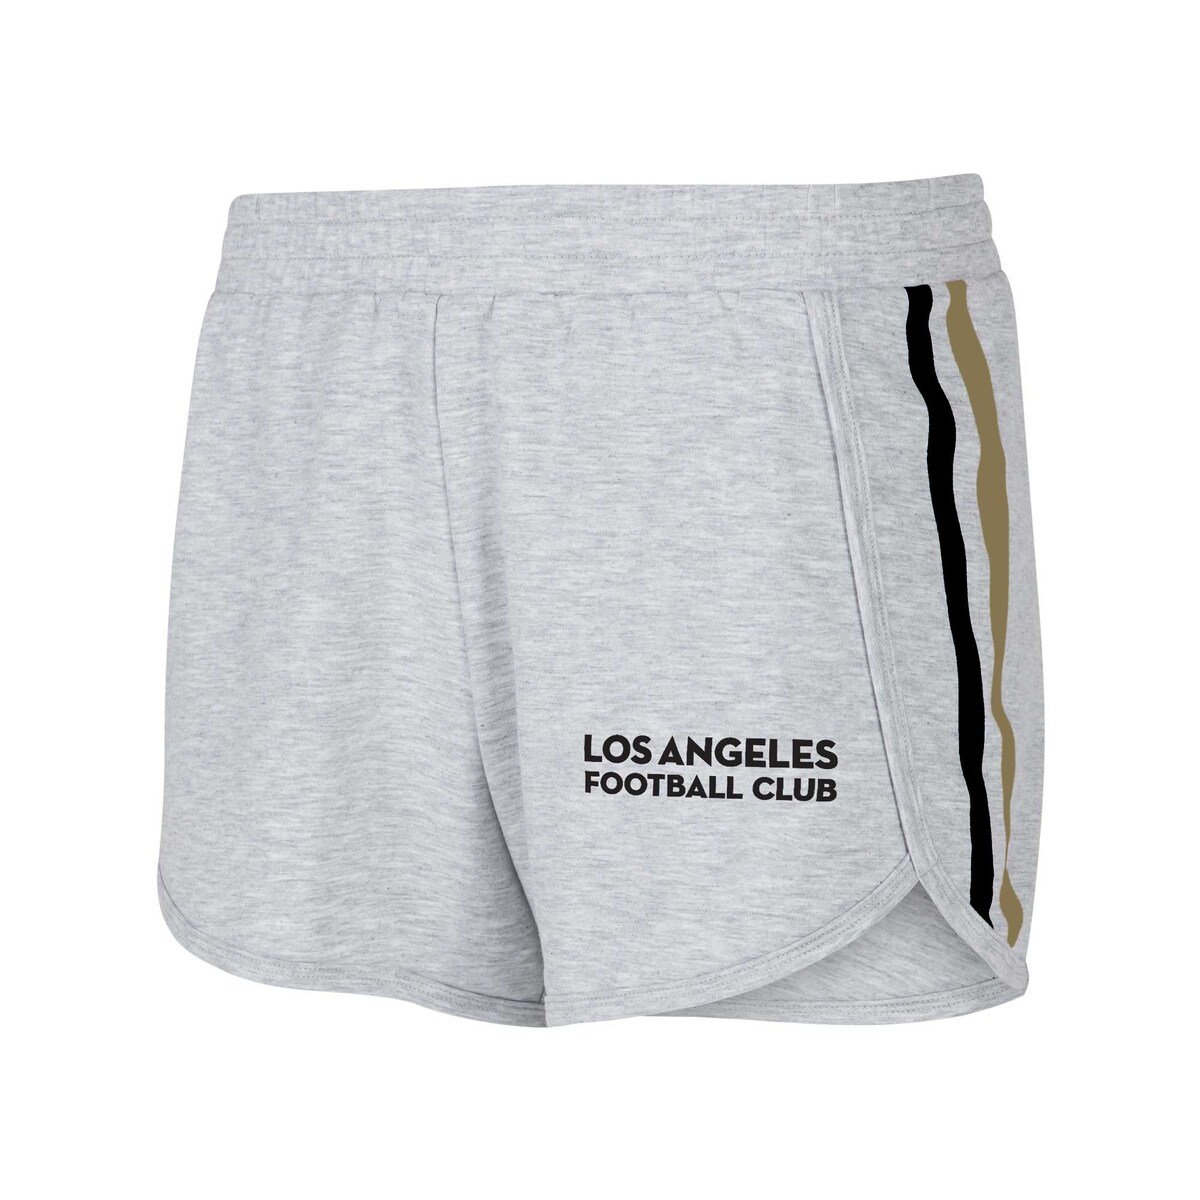 Lounge or exercise comfortably with these Cedar shorts from Concepts Sport. They feature bold LAFC graphics and stripes that pair well with a matching tee or hoodie. Tri-blend French Terry fabric offers optimal softness, while an elastic waist adjusts the fit to your perfect size.Material: 63% Polyester/33% Rayon/4% SpandexInseam on size S measures approx. 3.5"Fleece-linedMachine wash, tumble dry lowElastic waistbandImportedBrand: Concepts SportOfficially licensedScreen-print graphics